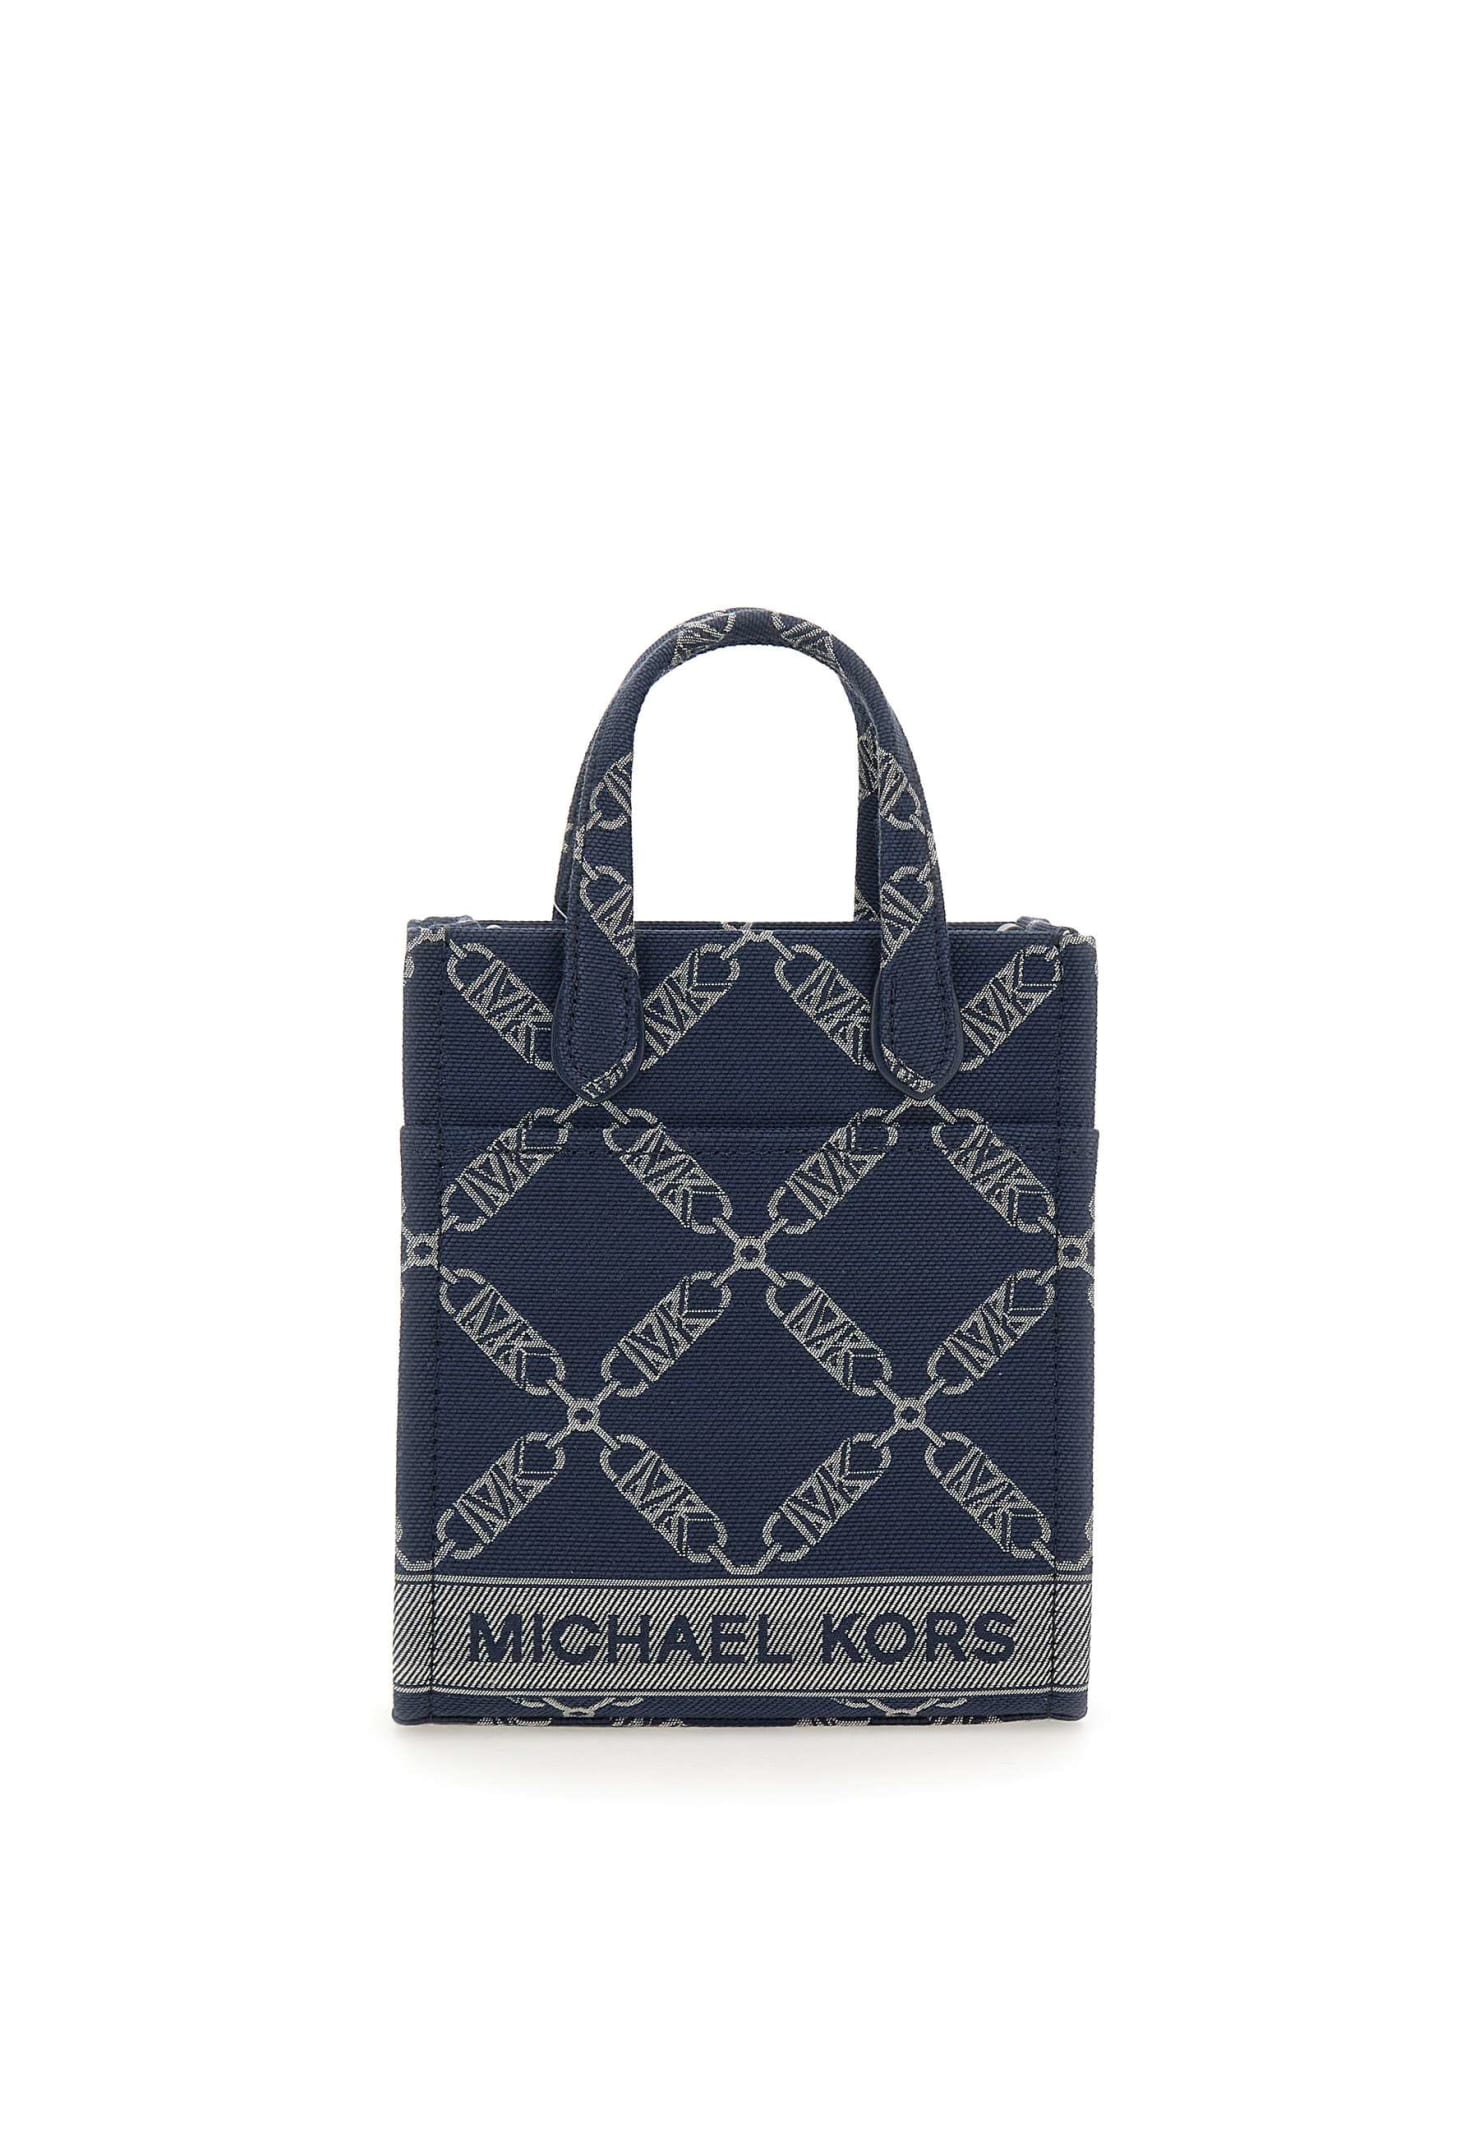 White And Blue Michael Kors Purse/ Handbag for Sale in